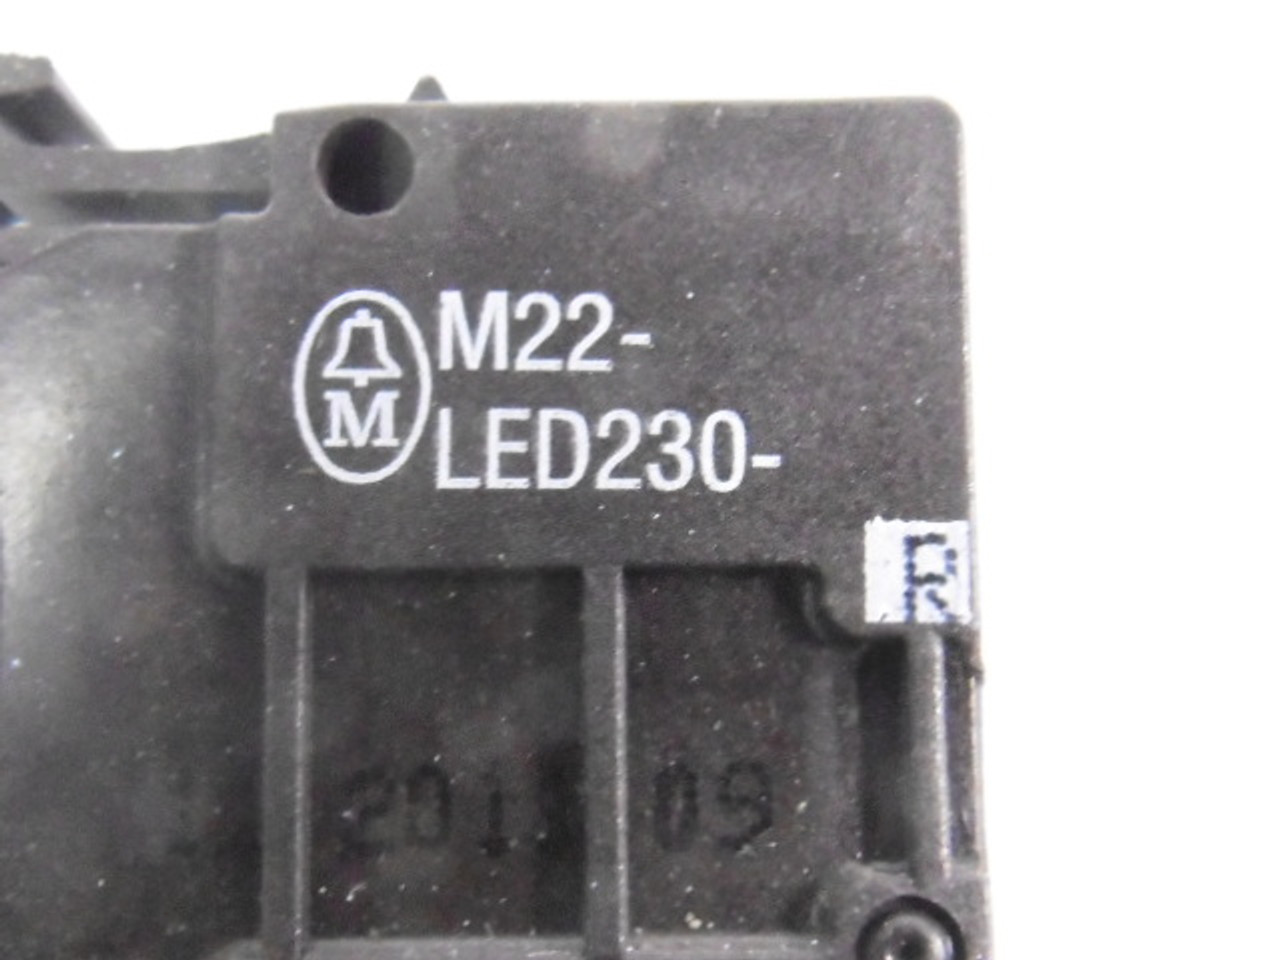 Klockner Moeller M22-LED230-R Contact Block With Red LED USED